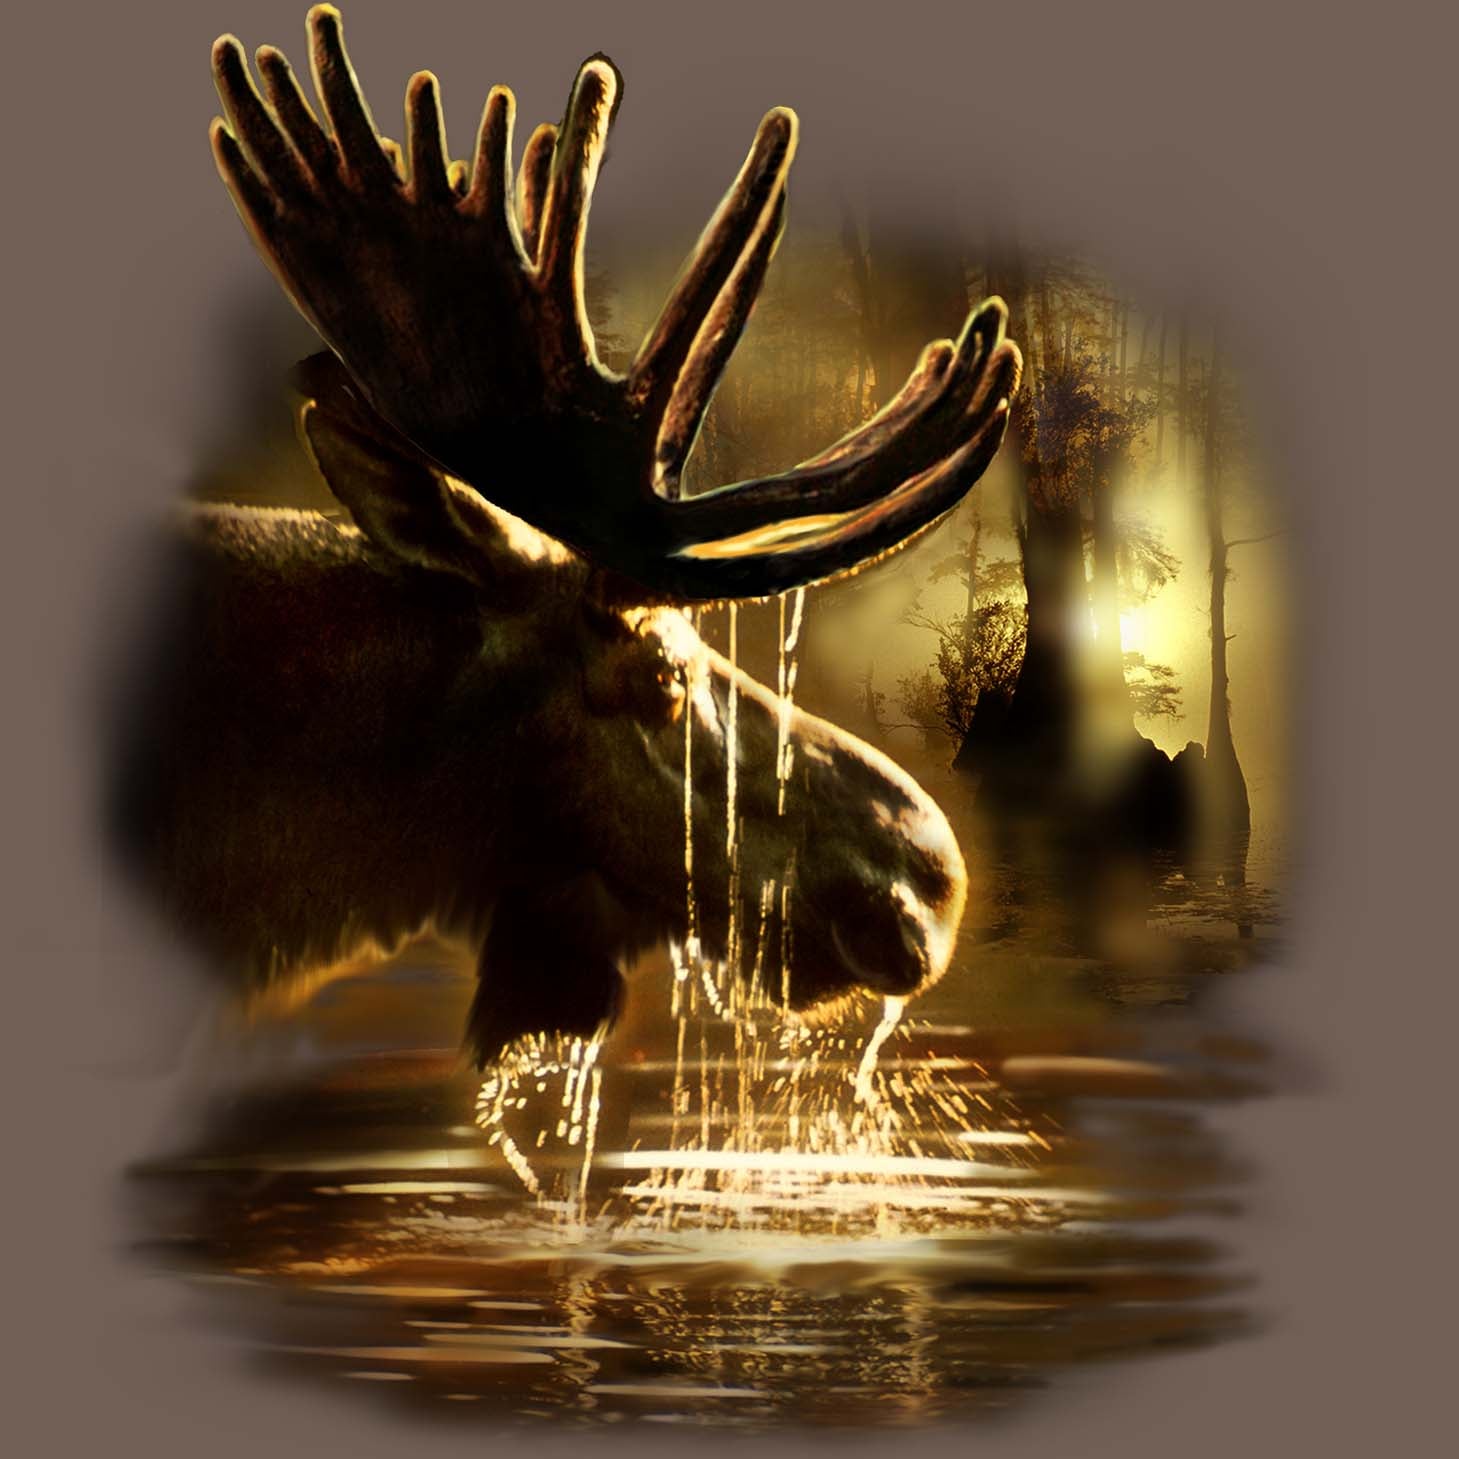 Moose Reflections by Tami Alba - painting of bull moose drinking from a lake